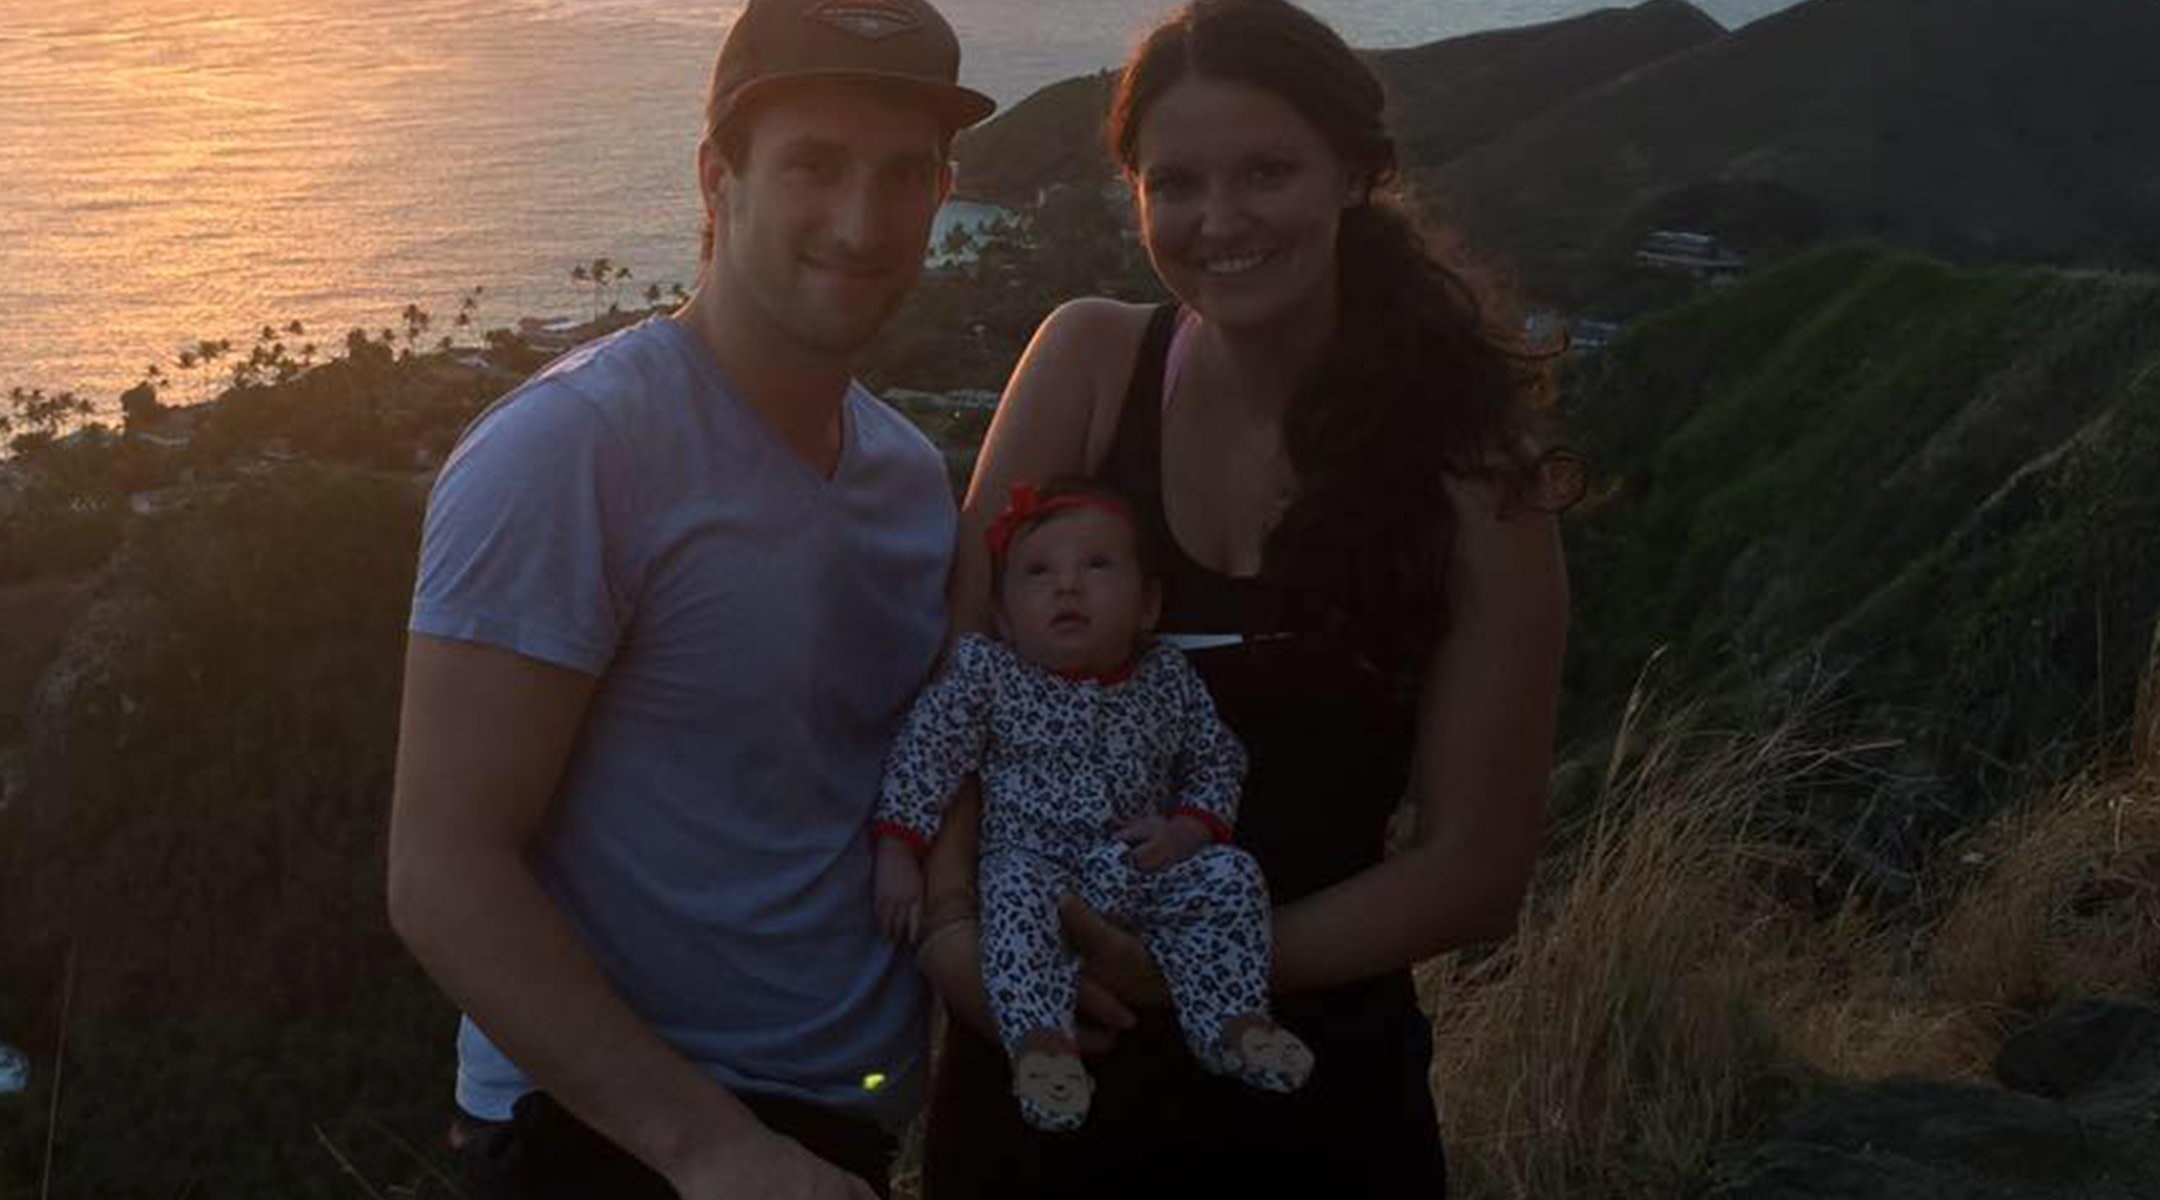 Hannah and Ben Hinders posing with their baby with the ocean in the background